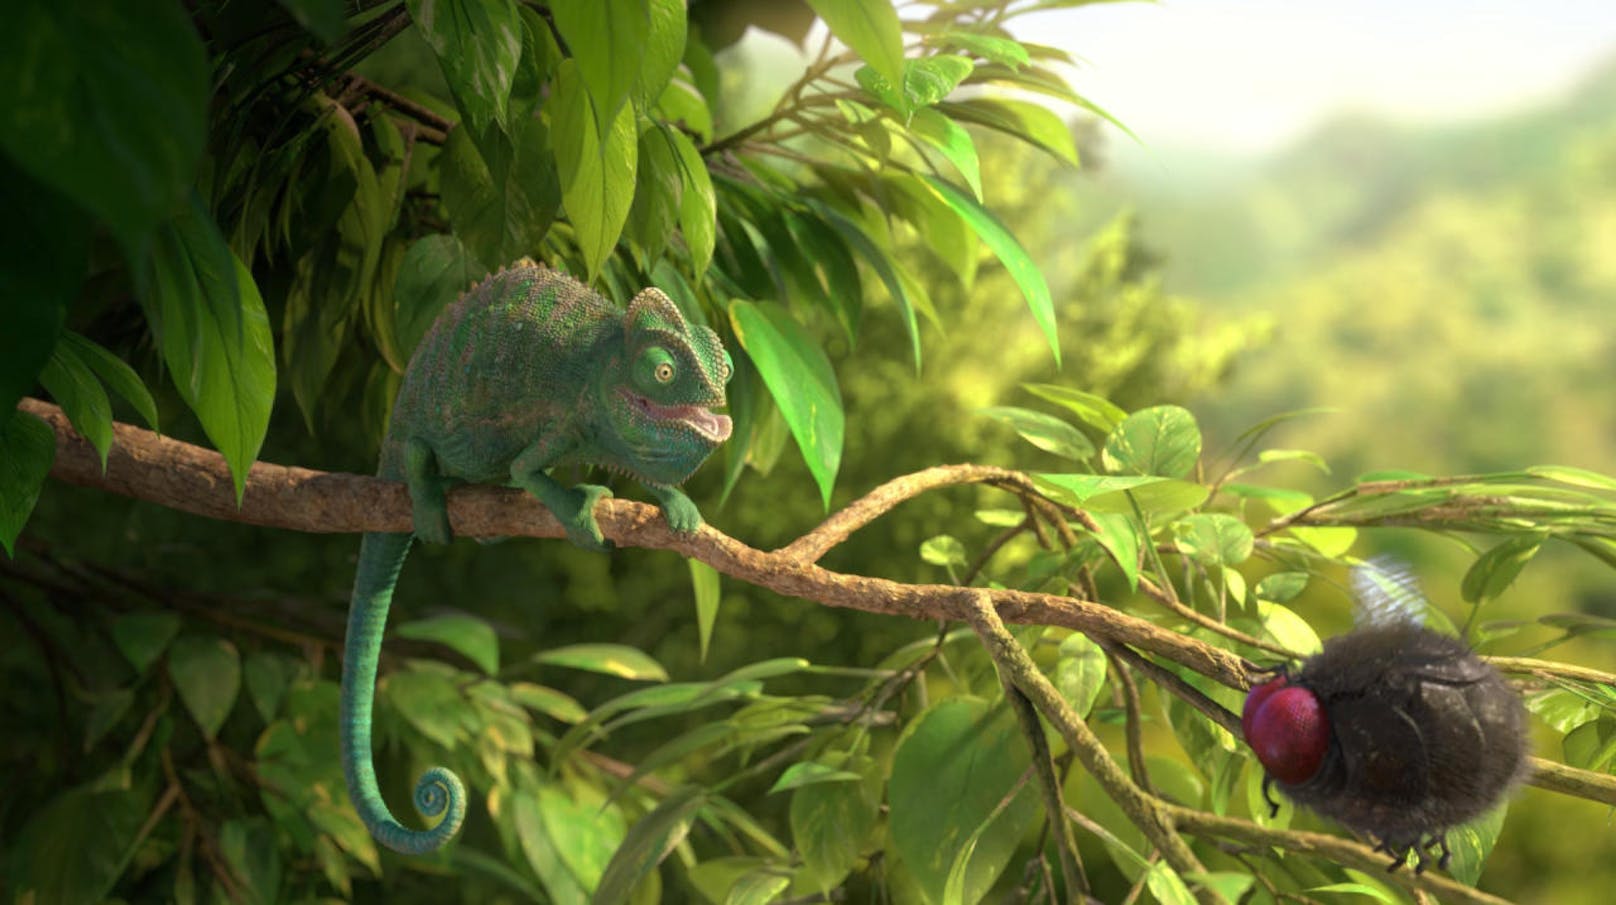 VIS Vienna Shorts: "Our Wonderful Nature - The Common Chameleon" - Tomer Eshed